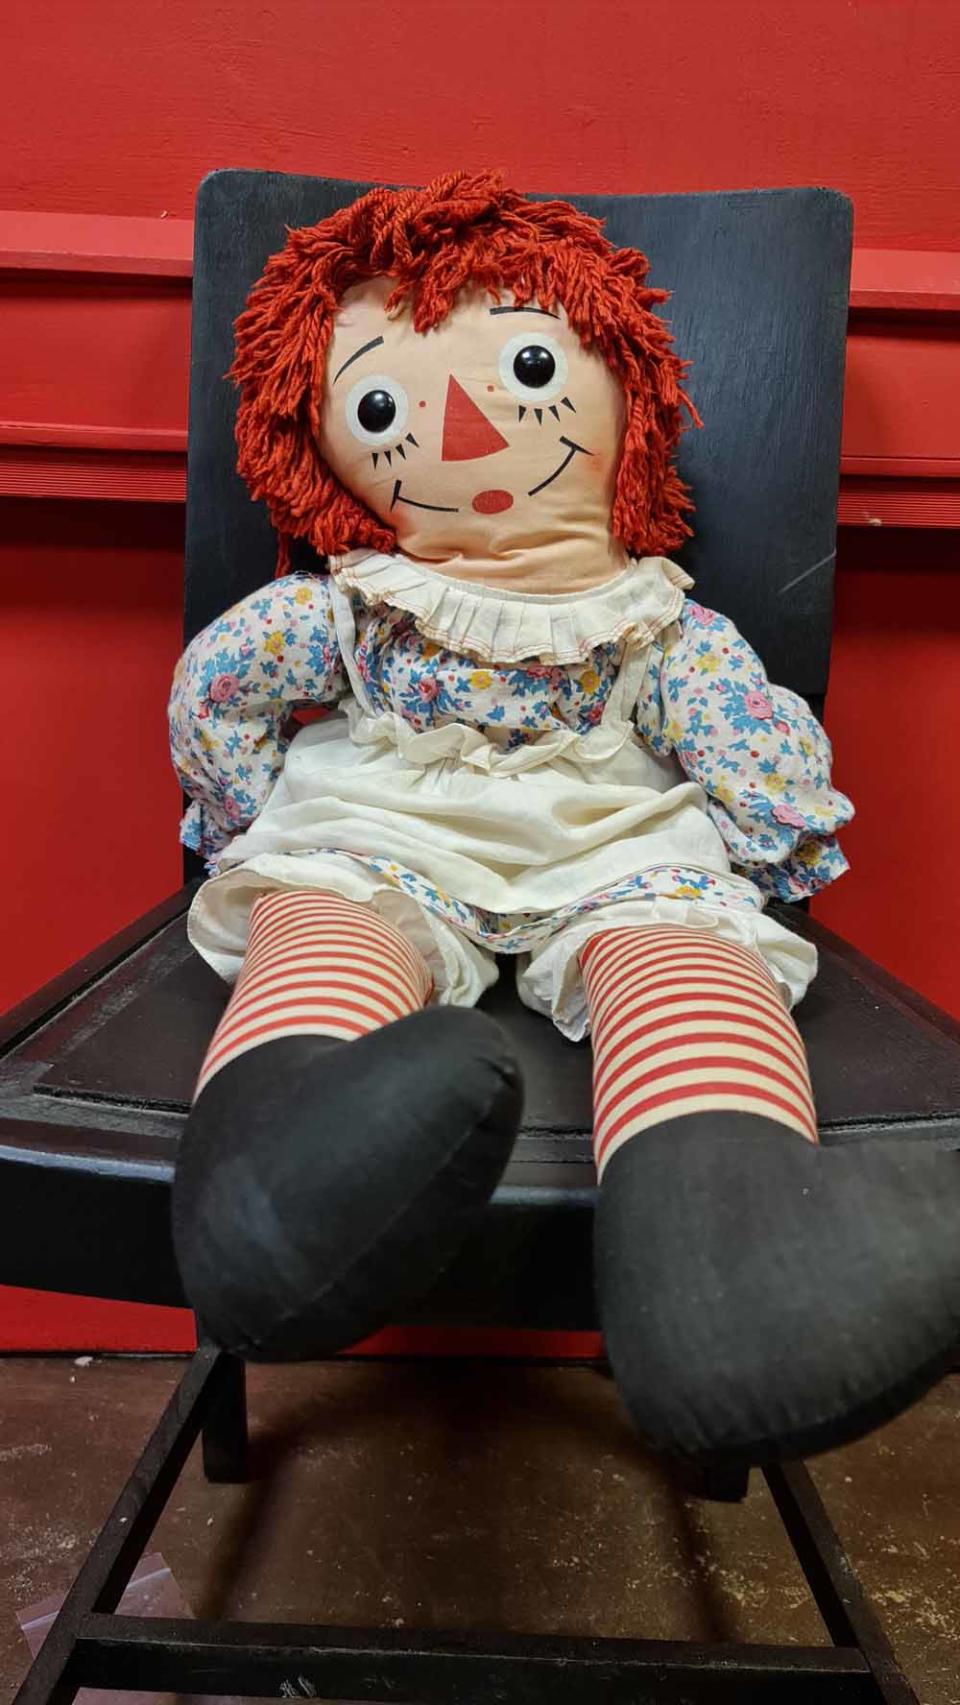 Annabelle threatened to kill Linzi during a spirit box session in 2019 (PA Real Life/Collect)